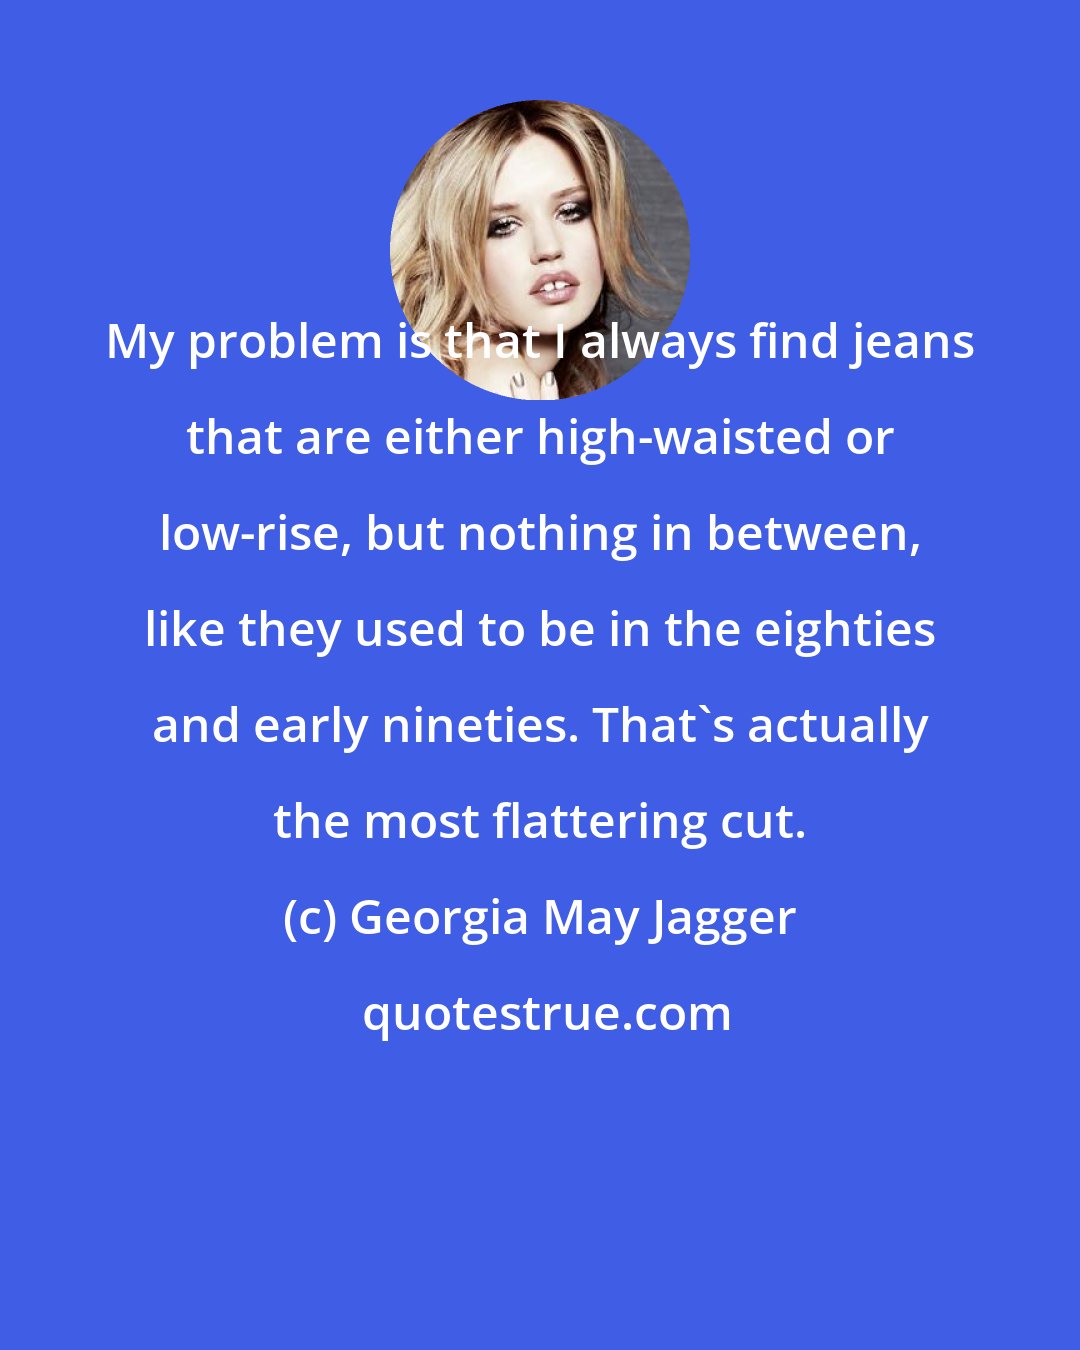 Georgia May Jagger: My problem is that I always find jeans that are either high-waisted or low-rise, but nothing in between, like they used to be in the eighties and early nineties. That's actually the most flattering cut.